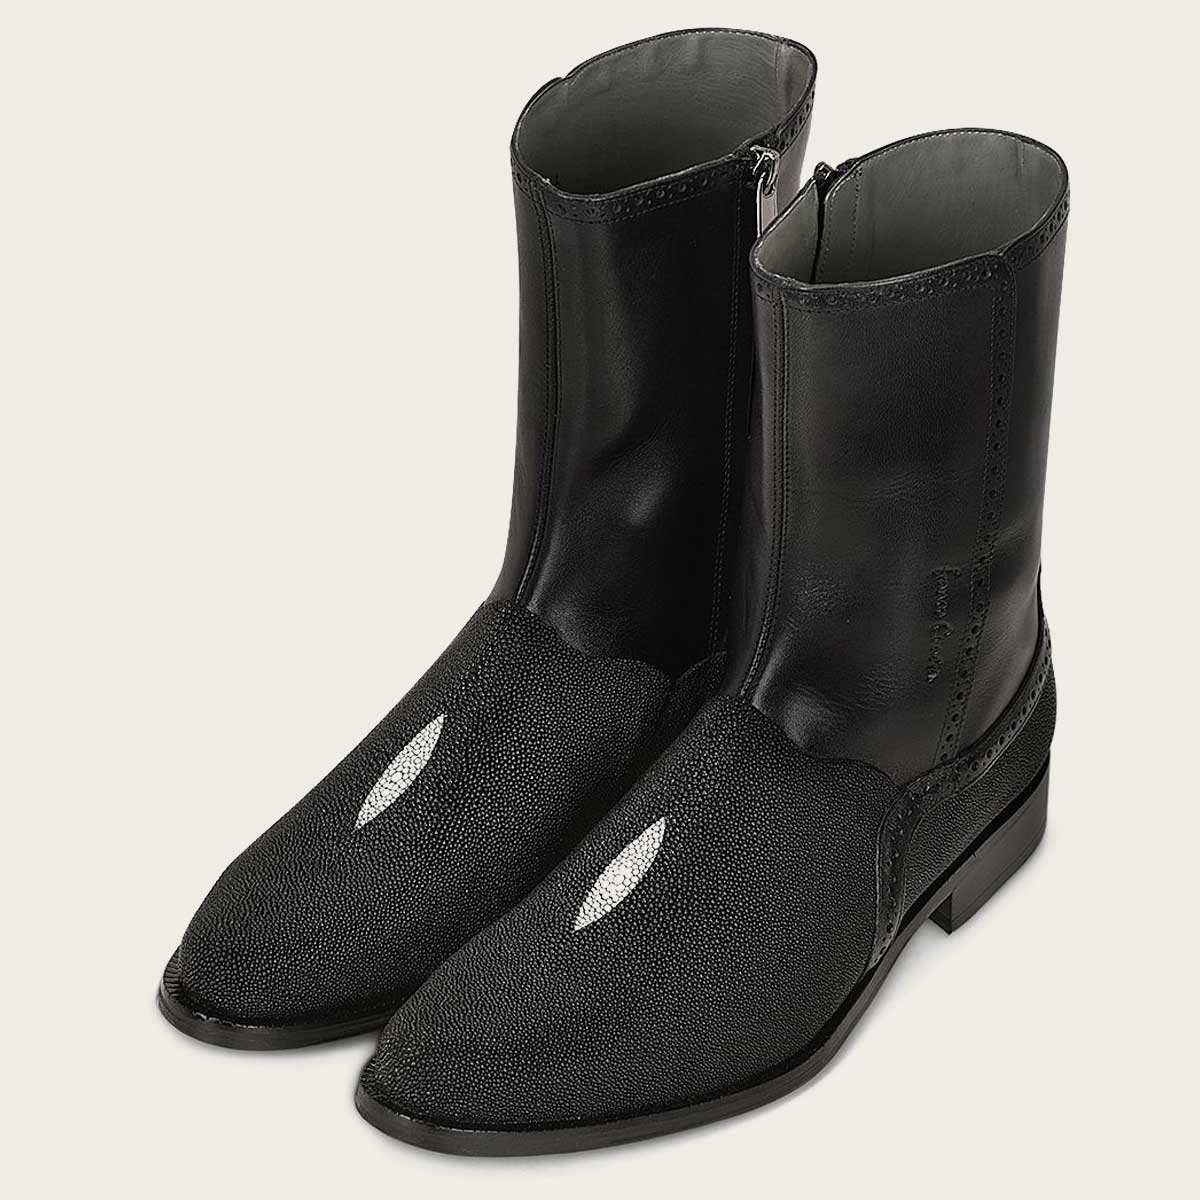 Step up your style with these black stingray exotic leather boots, crafted for both durability and luxury